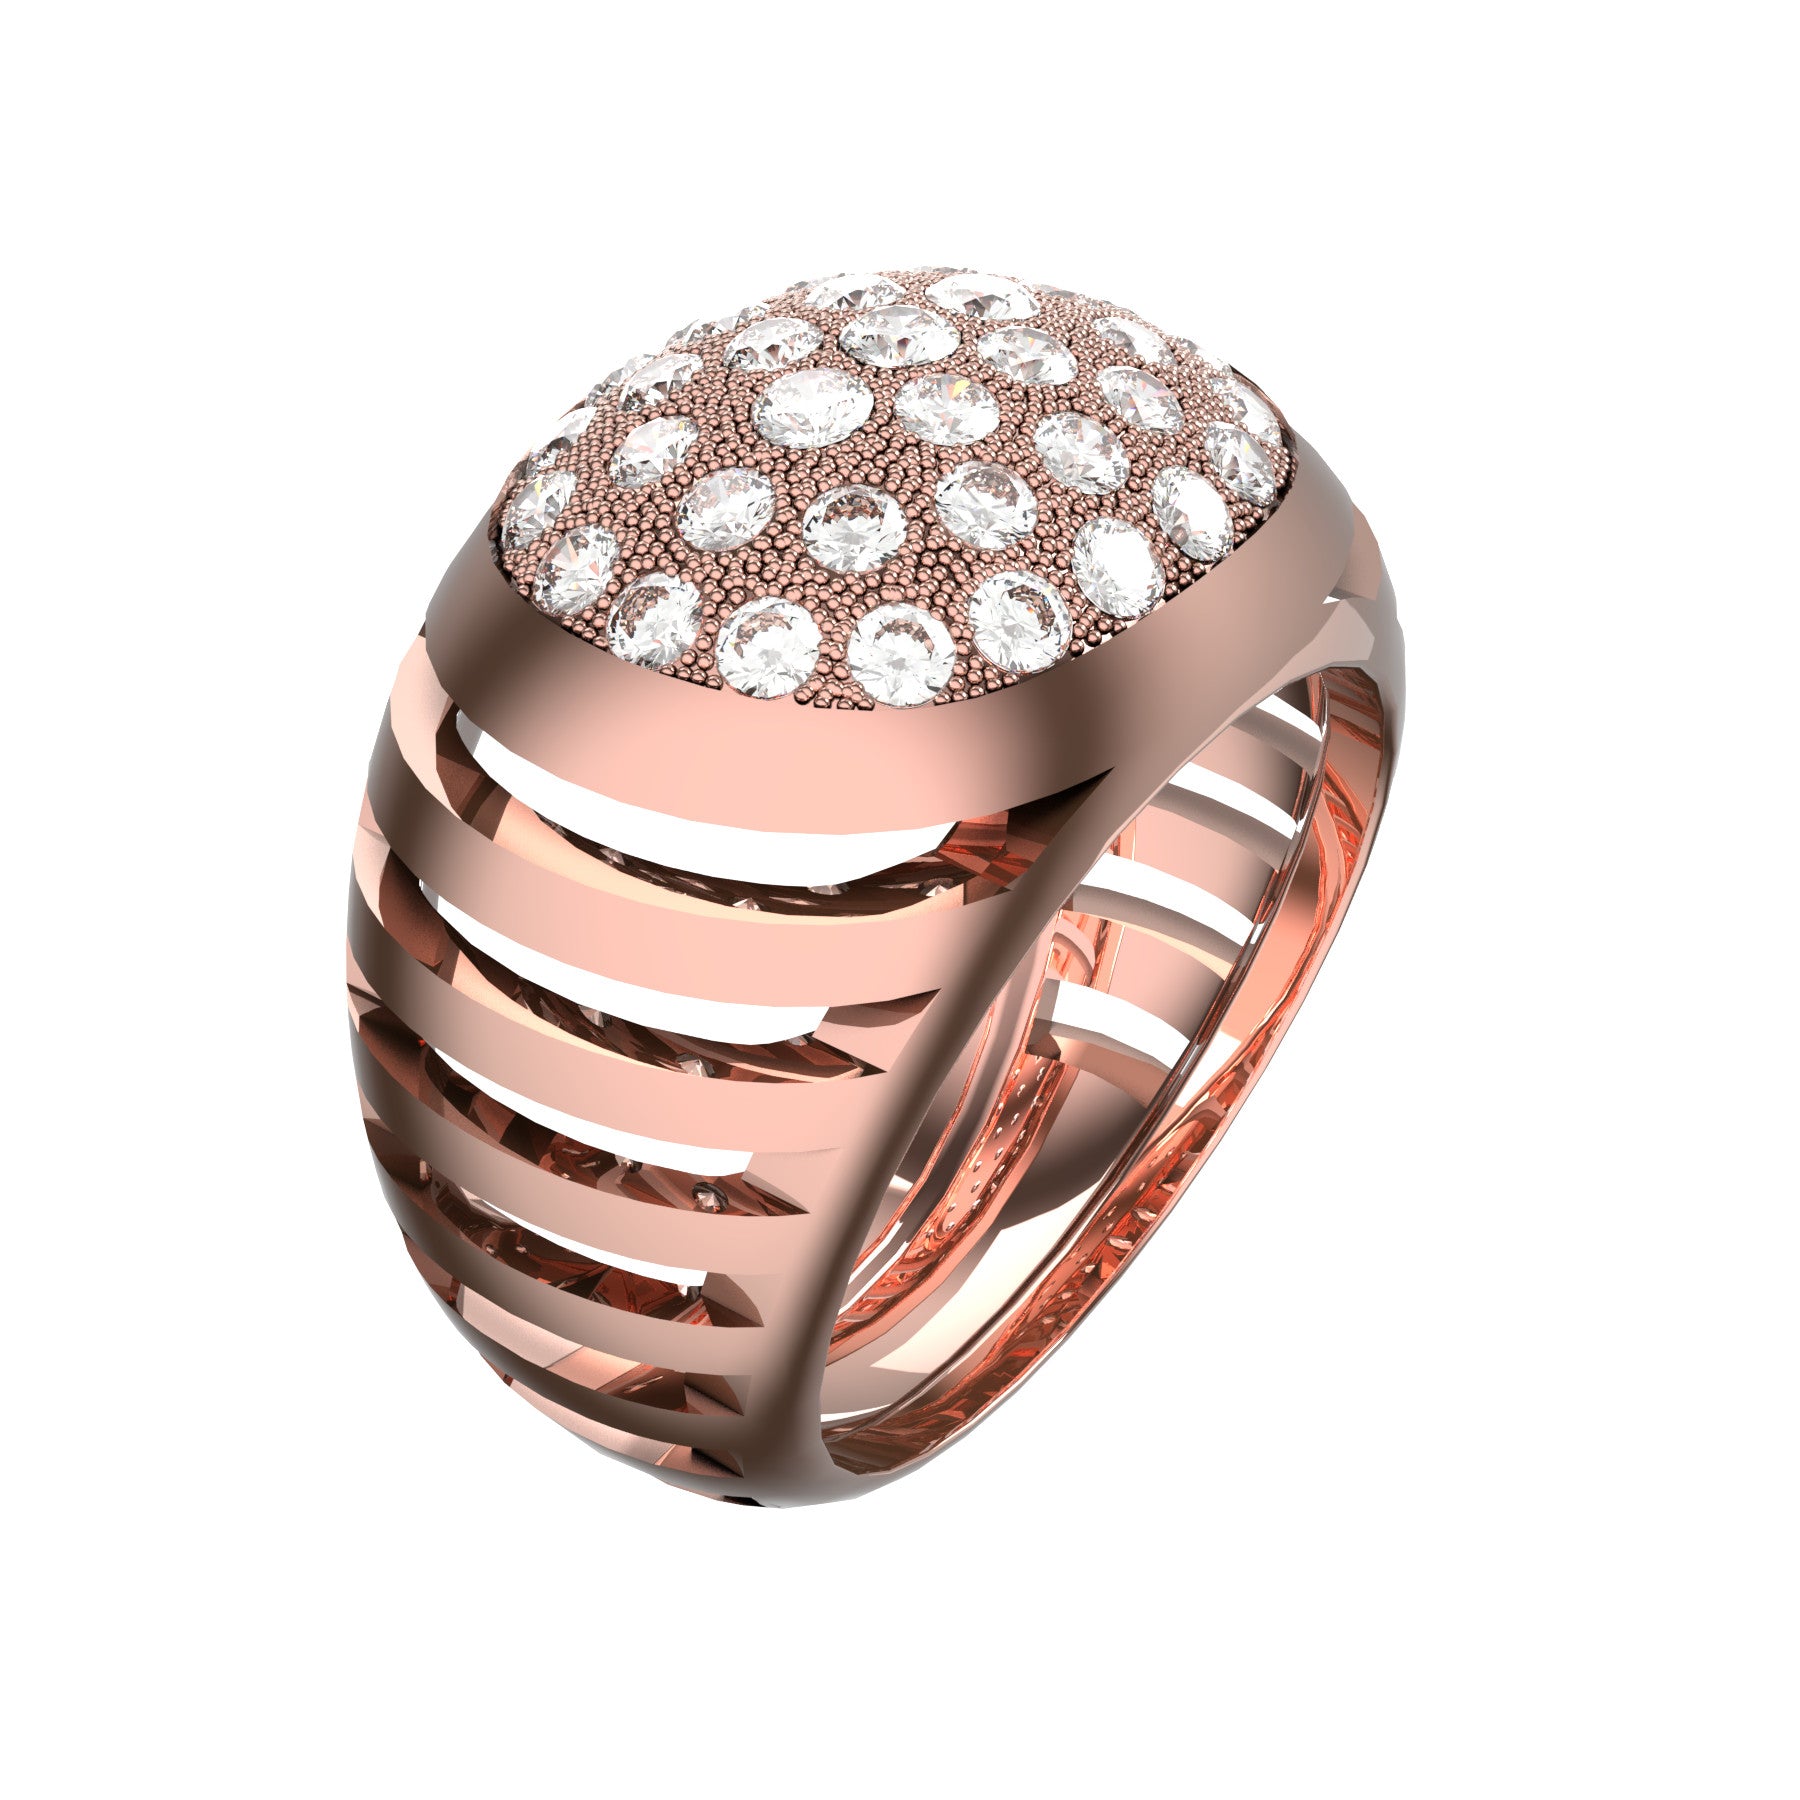 split 3 ring, natural round diamonds, 18 K pink gold, weight about 9,1 g. (0.32 oz), width 14,0 mm max